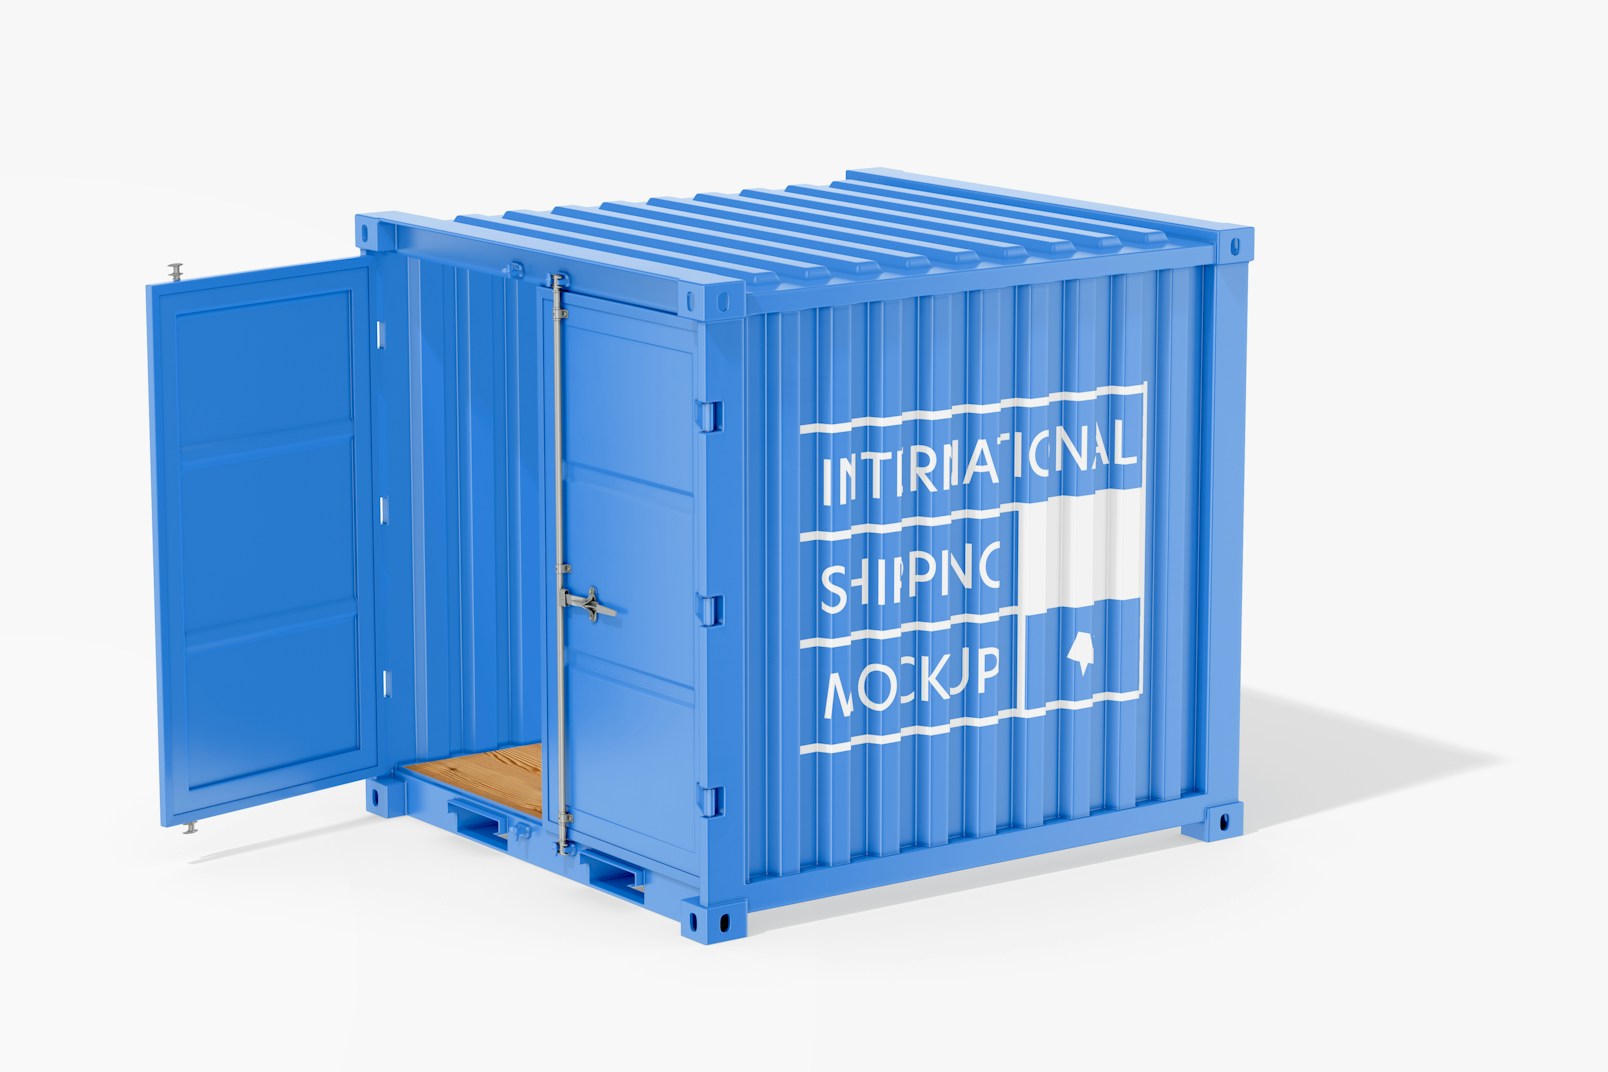 Shipping Container Mockup, Opened